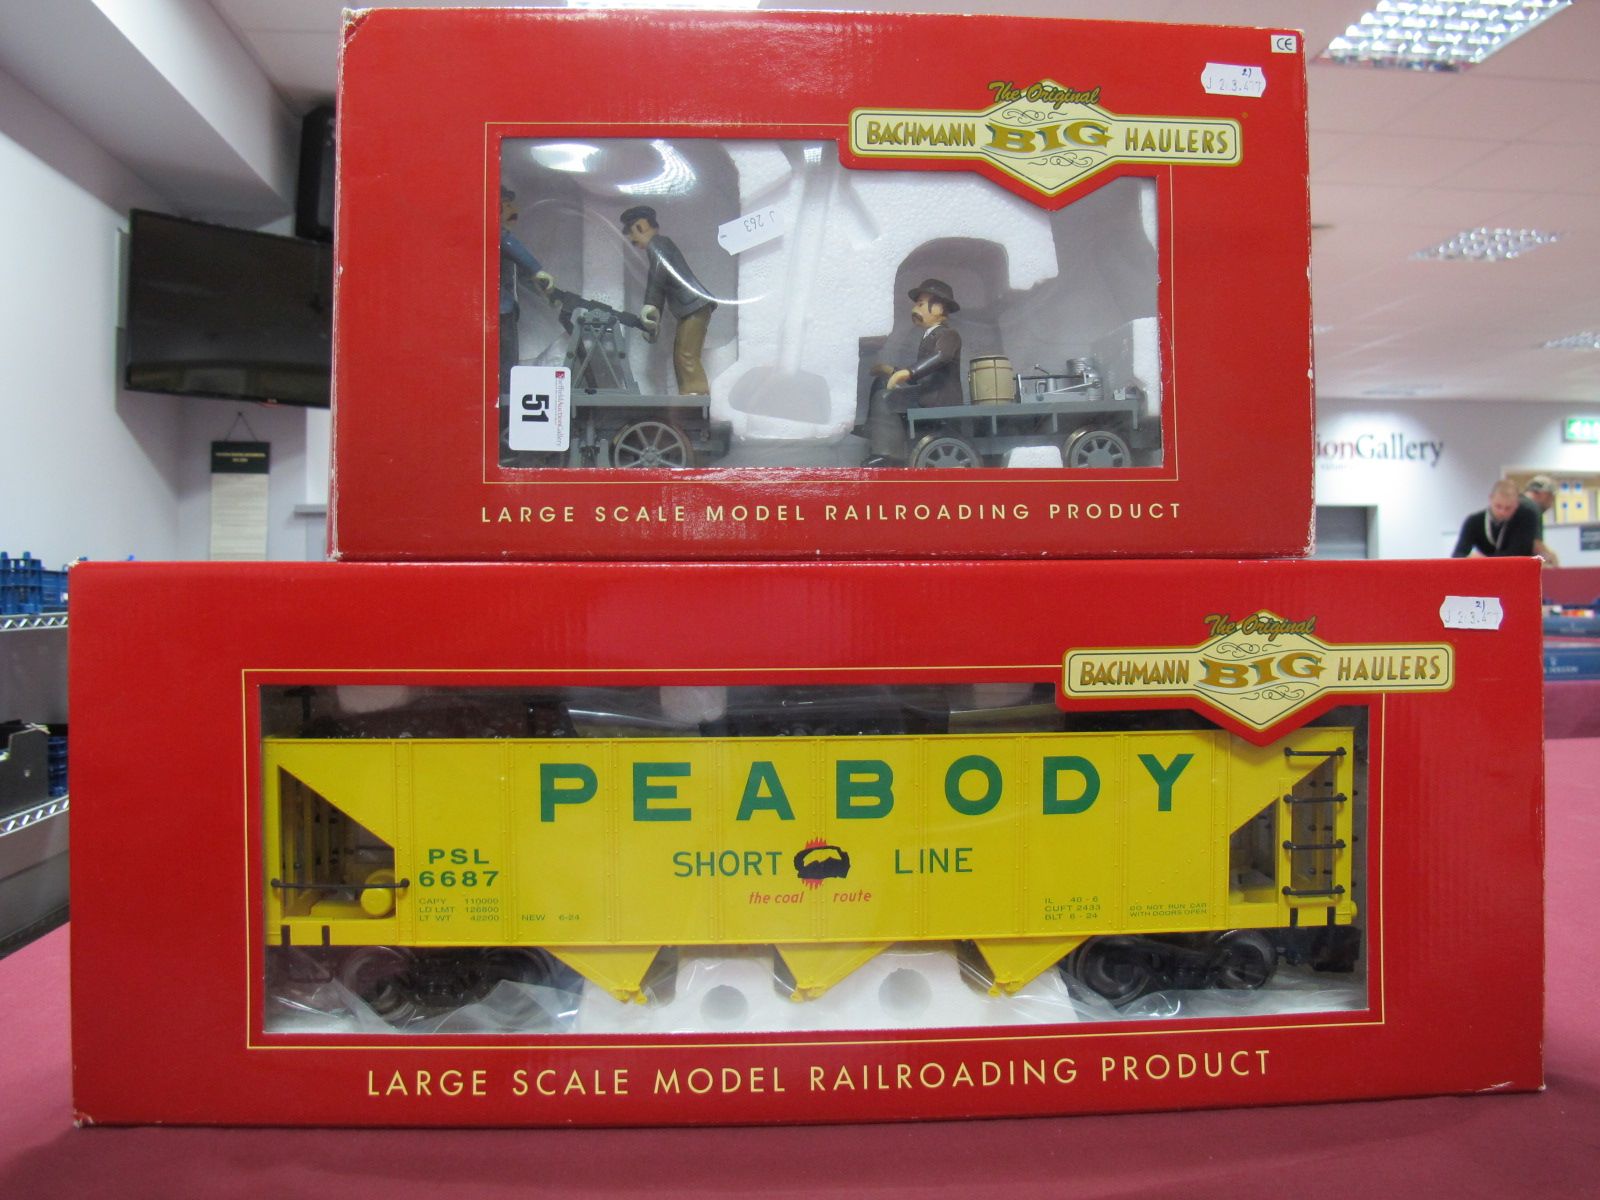 A Boxed Bachmann Big Haulers 'G' Gauge #98229 ""L"" Hoppers Wagon Peabody Short Line; together with